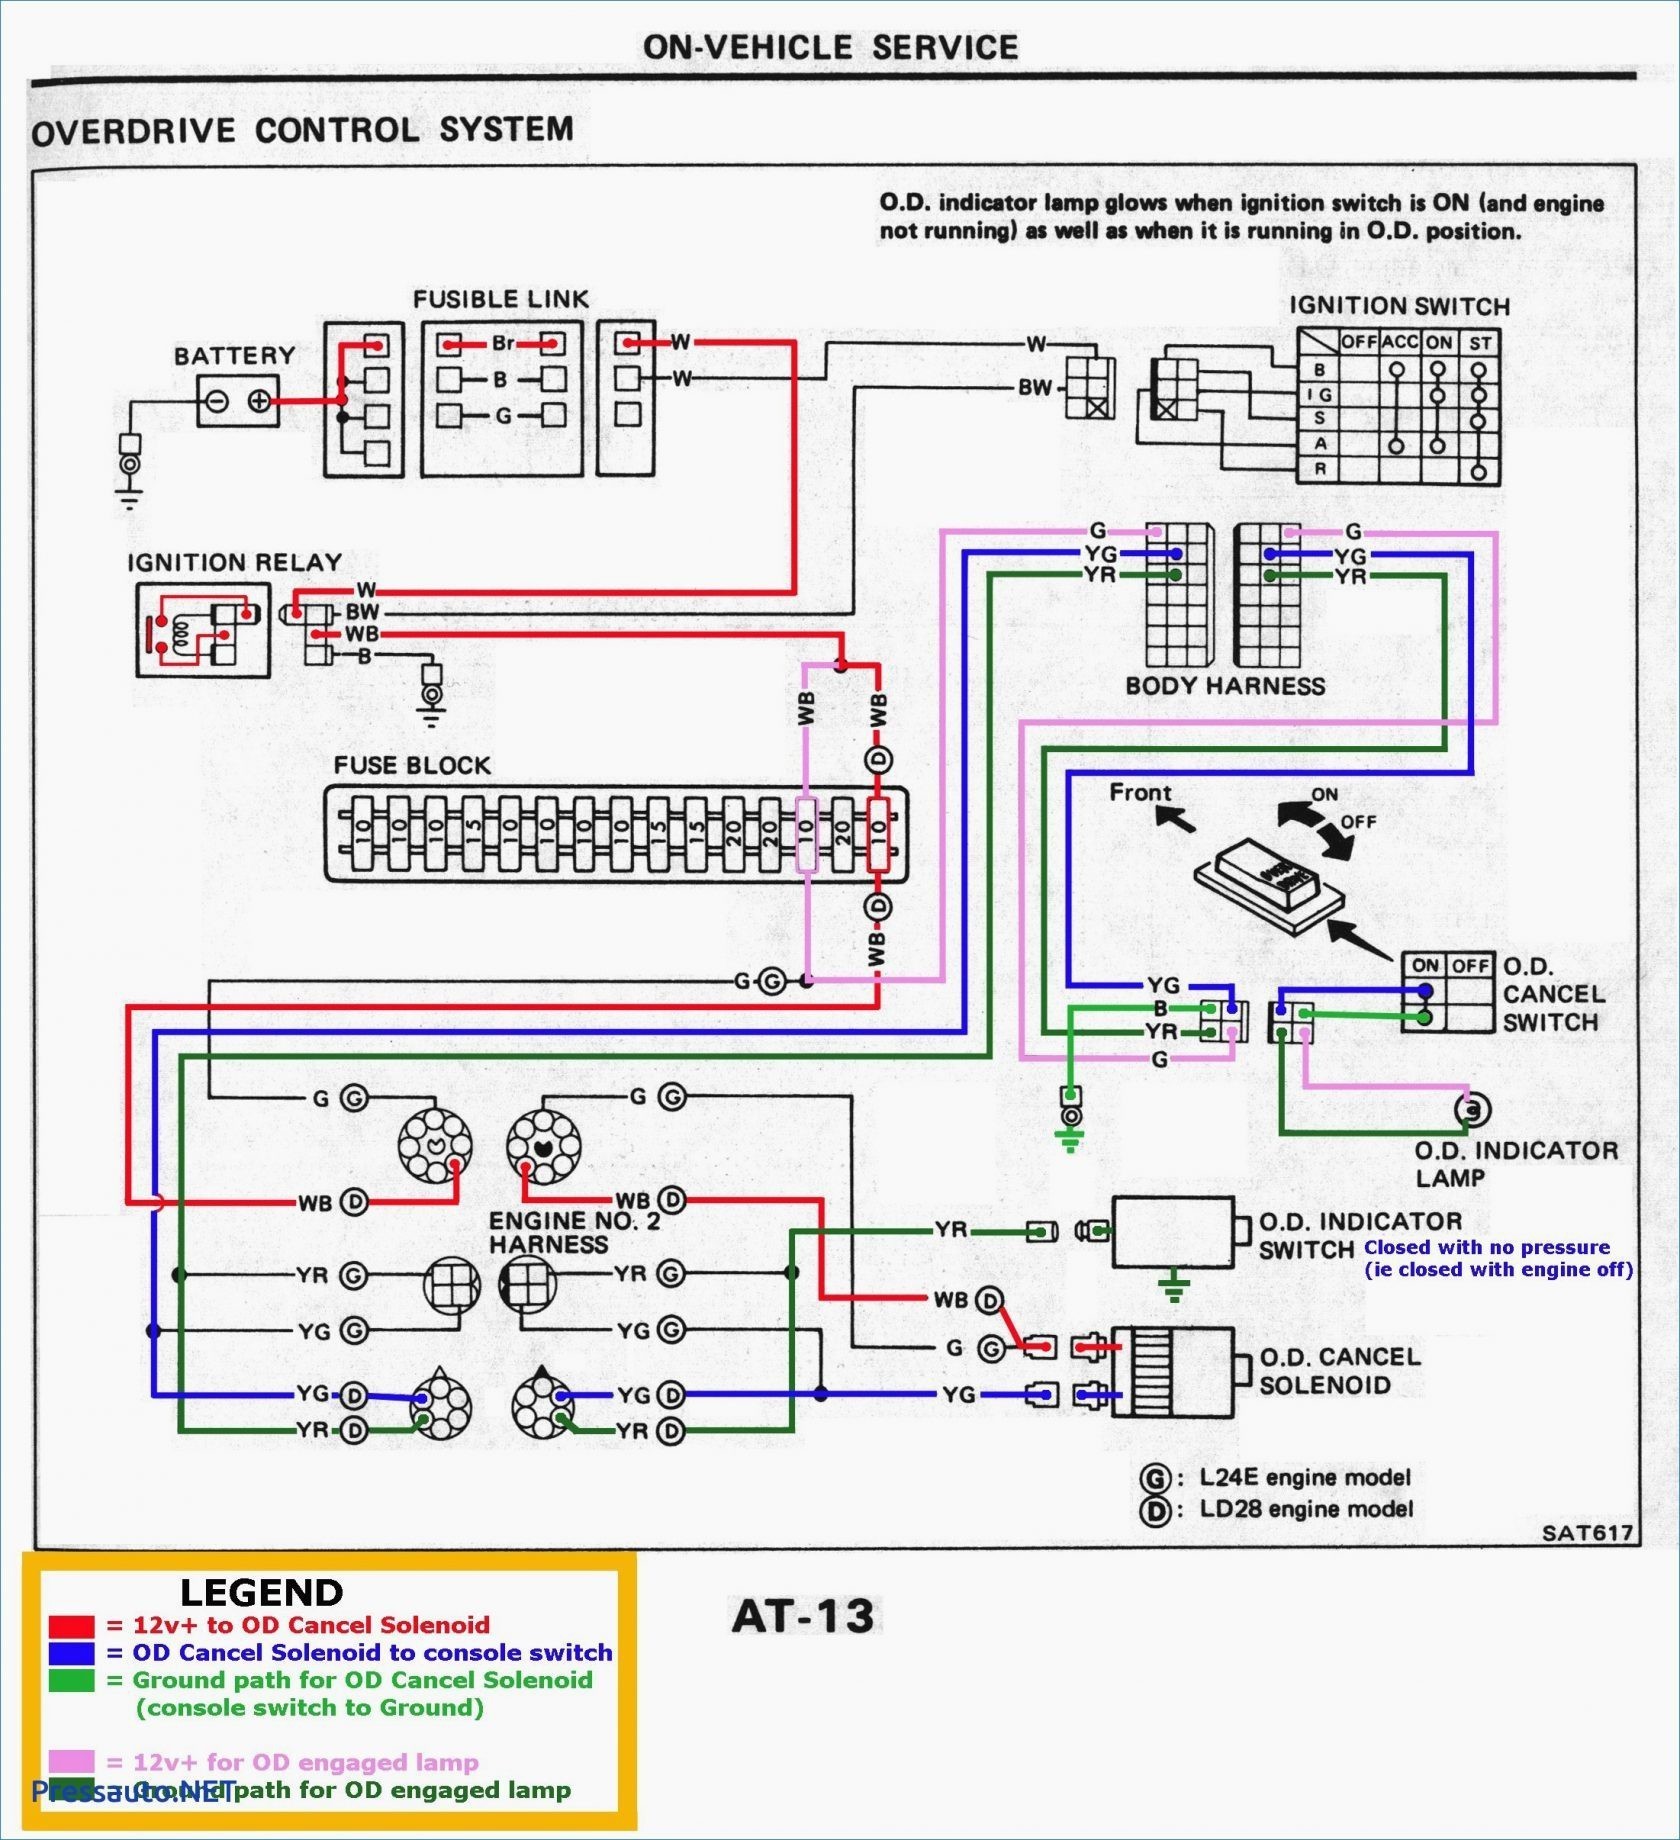 How to Read Automotive Wiring Diagrams Understanding Car Wiring Diagrams Wiring Diagram Inside Of How to Read Automotive Wiring Diagrams